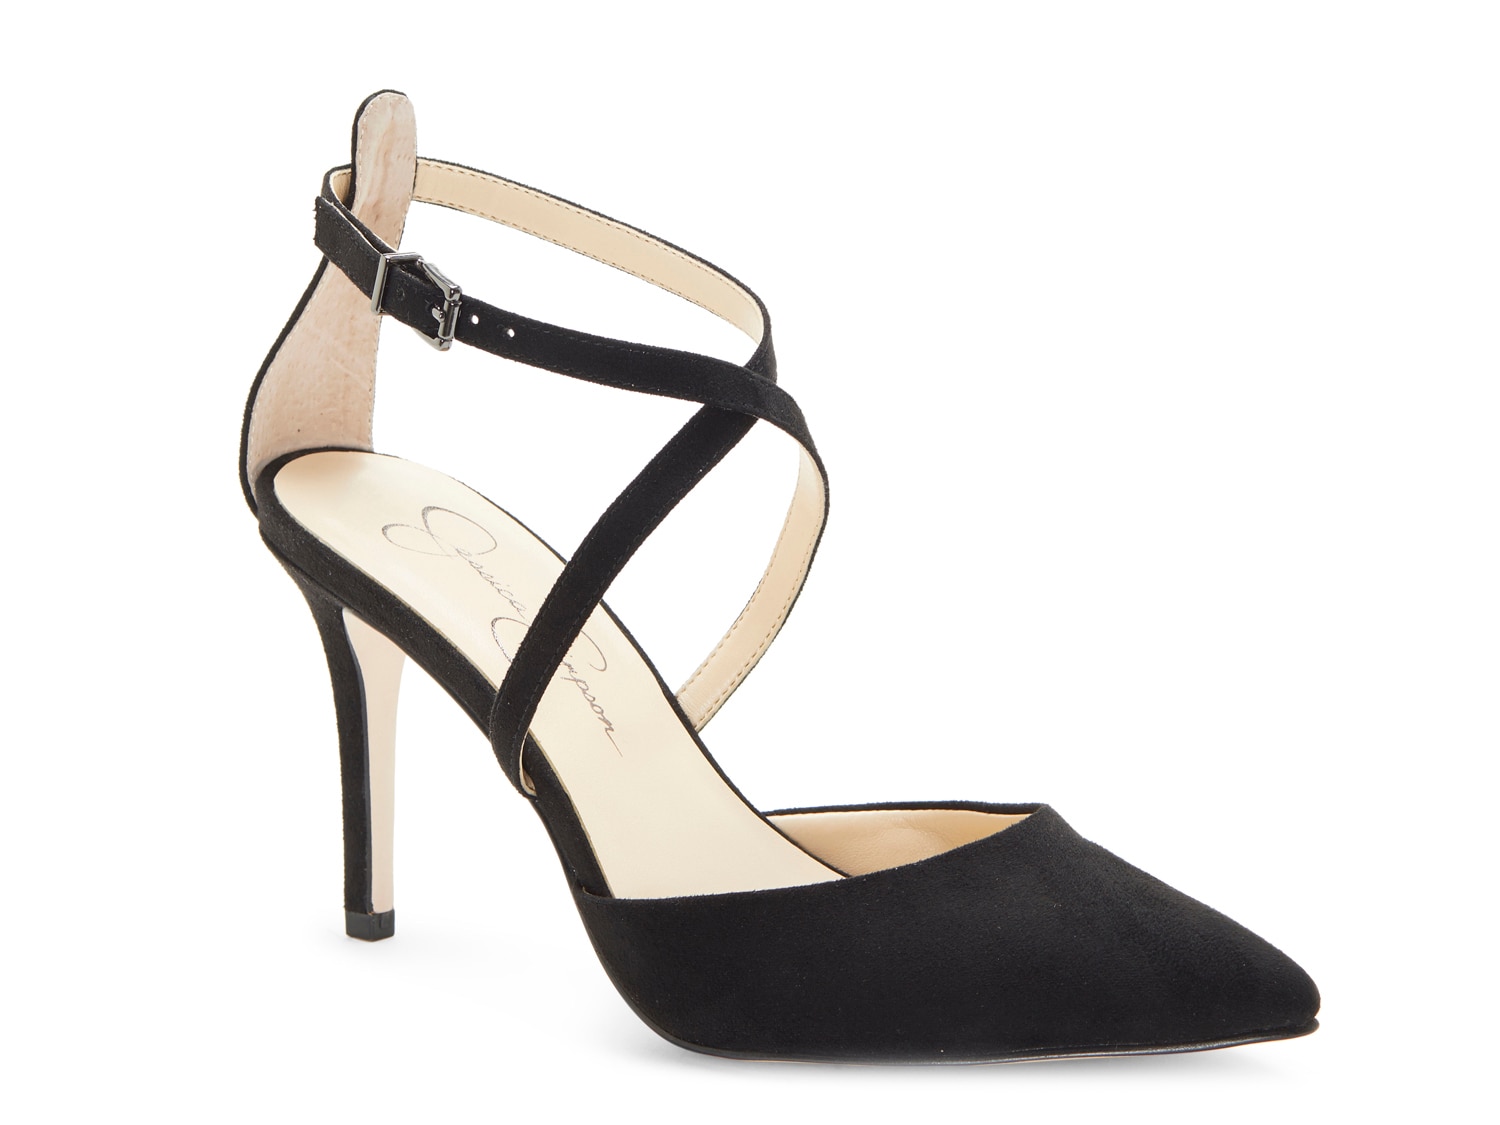 Jessica Simpson Ambrie Pump - Free Shipping | DSW